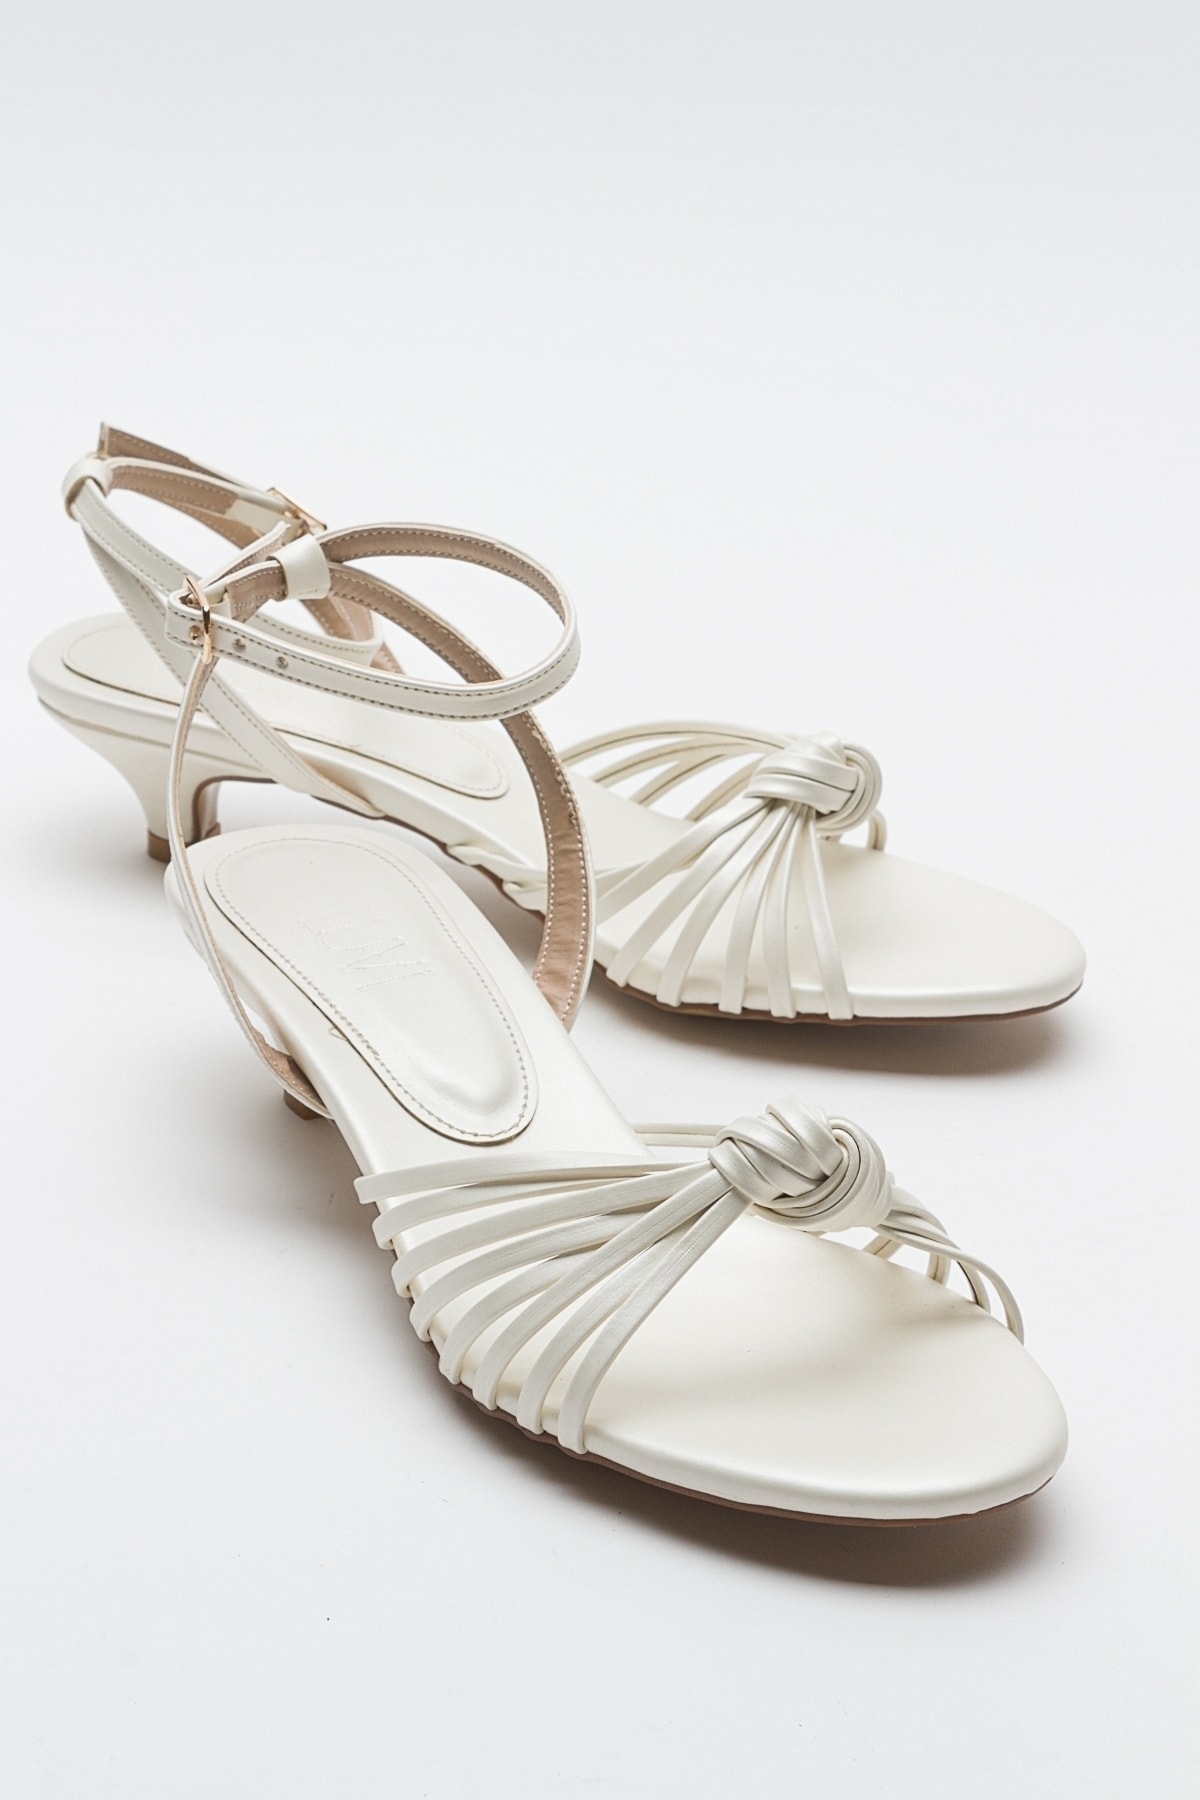 LuviShoes VİN Women with Mother-of-Pearl Skin Heeled Sandals